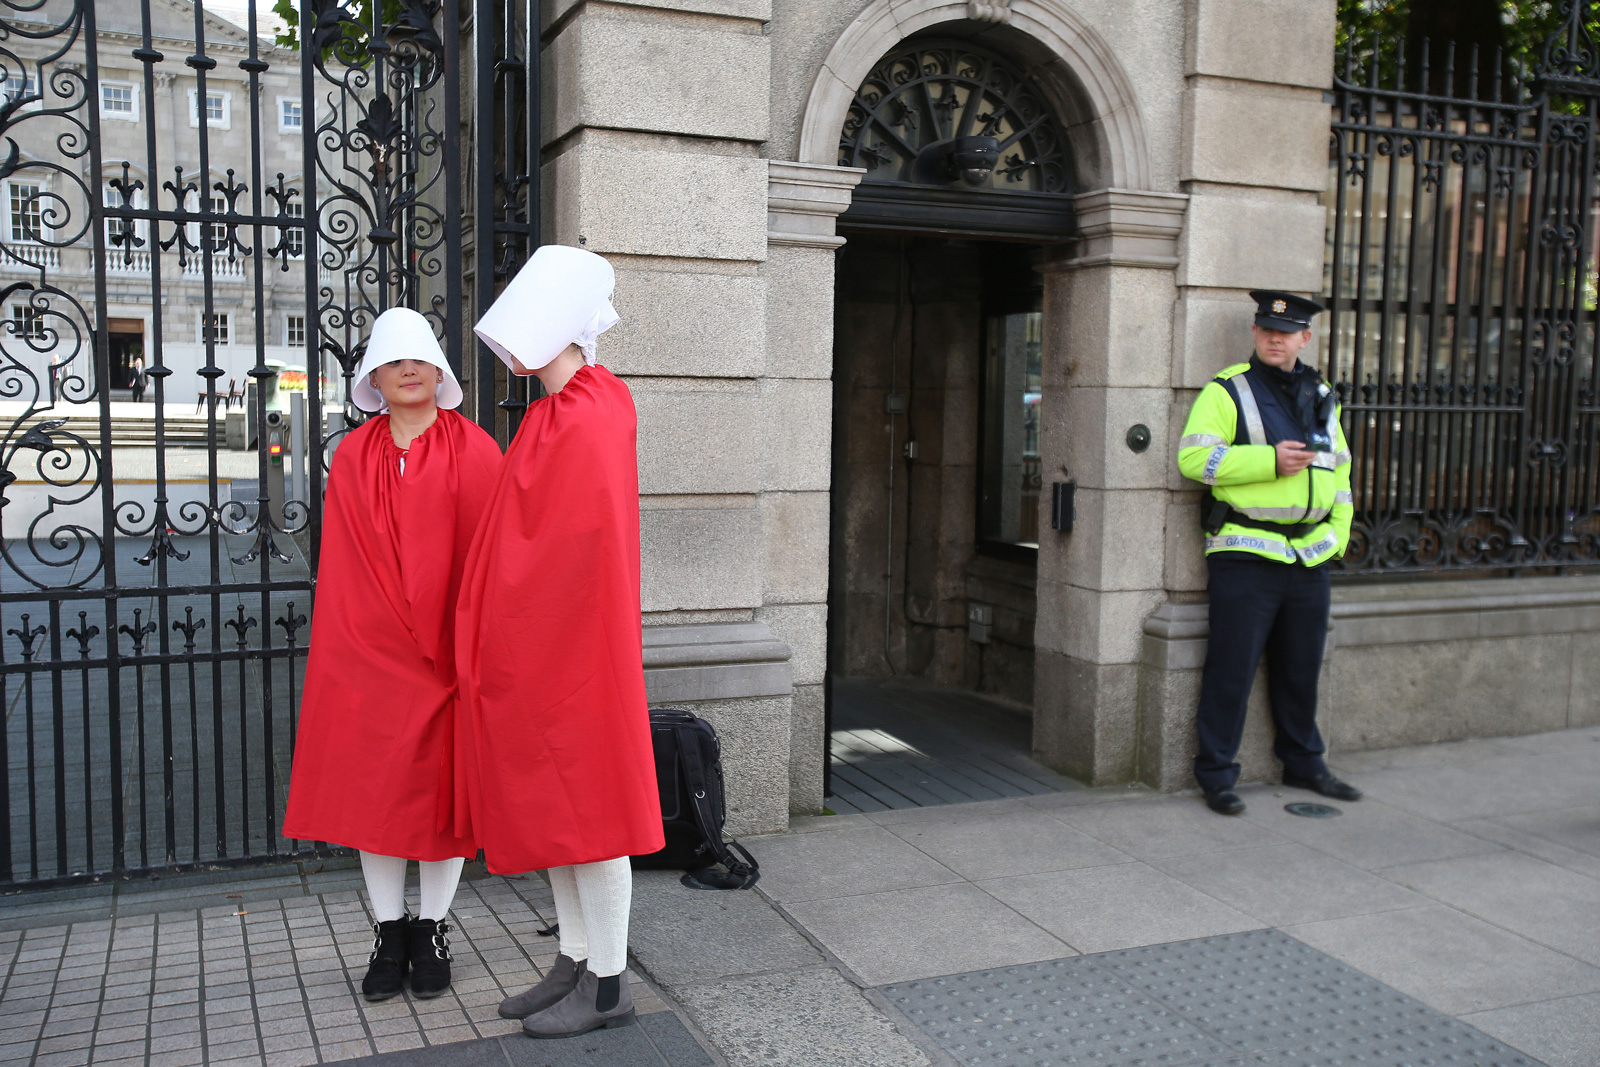 Reproductive rights activists, dressed as Handmaids from Margaret Atwood’s The Handmaid’s Tale, outside the Irish parliament before deliberation about the constitutional ban on abortion, September 18, 2017